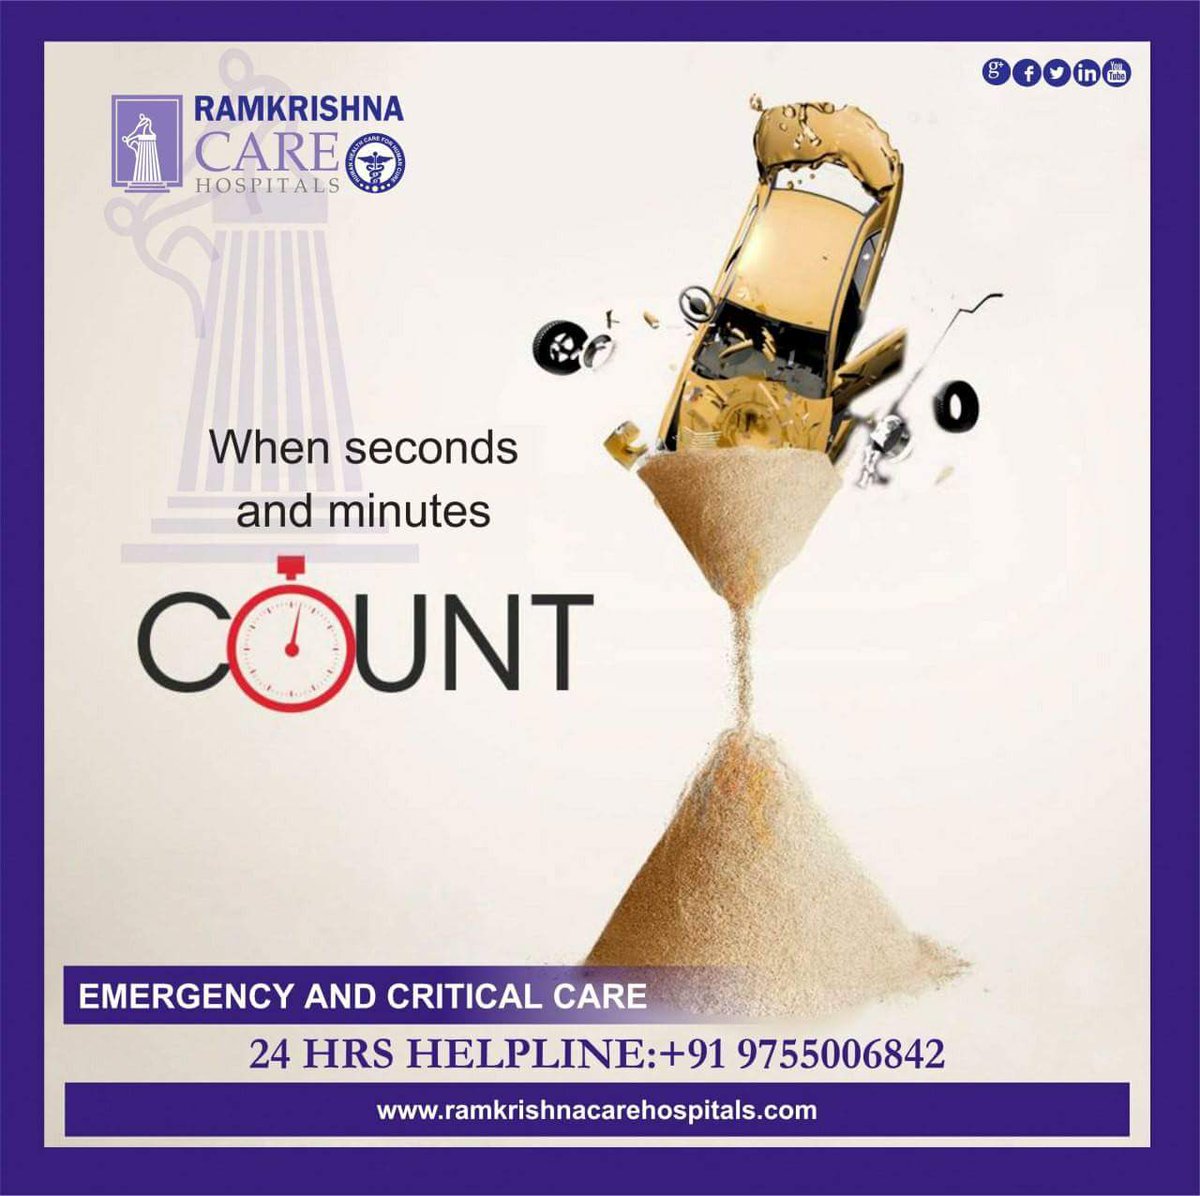 For patients suffering from critical situations we provide advanced emergency care. The staff of most qualified emergency doctors takes  extra care of patients. The acutely ill patients gets immediate care at emergency rooms
#EmergencyAndCriticalCare
#RamkrishnaCare #ER #Raipur